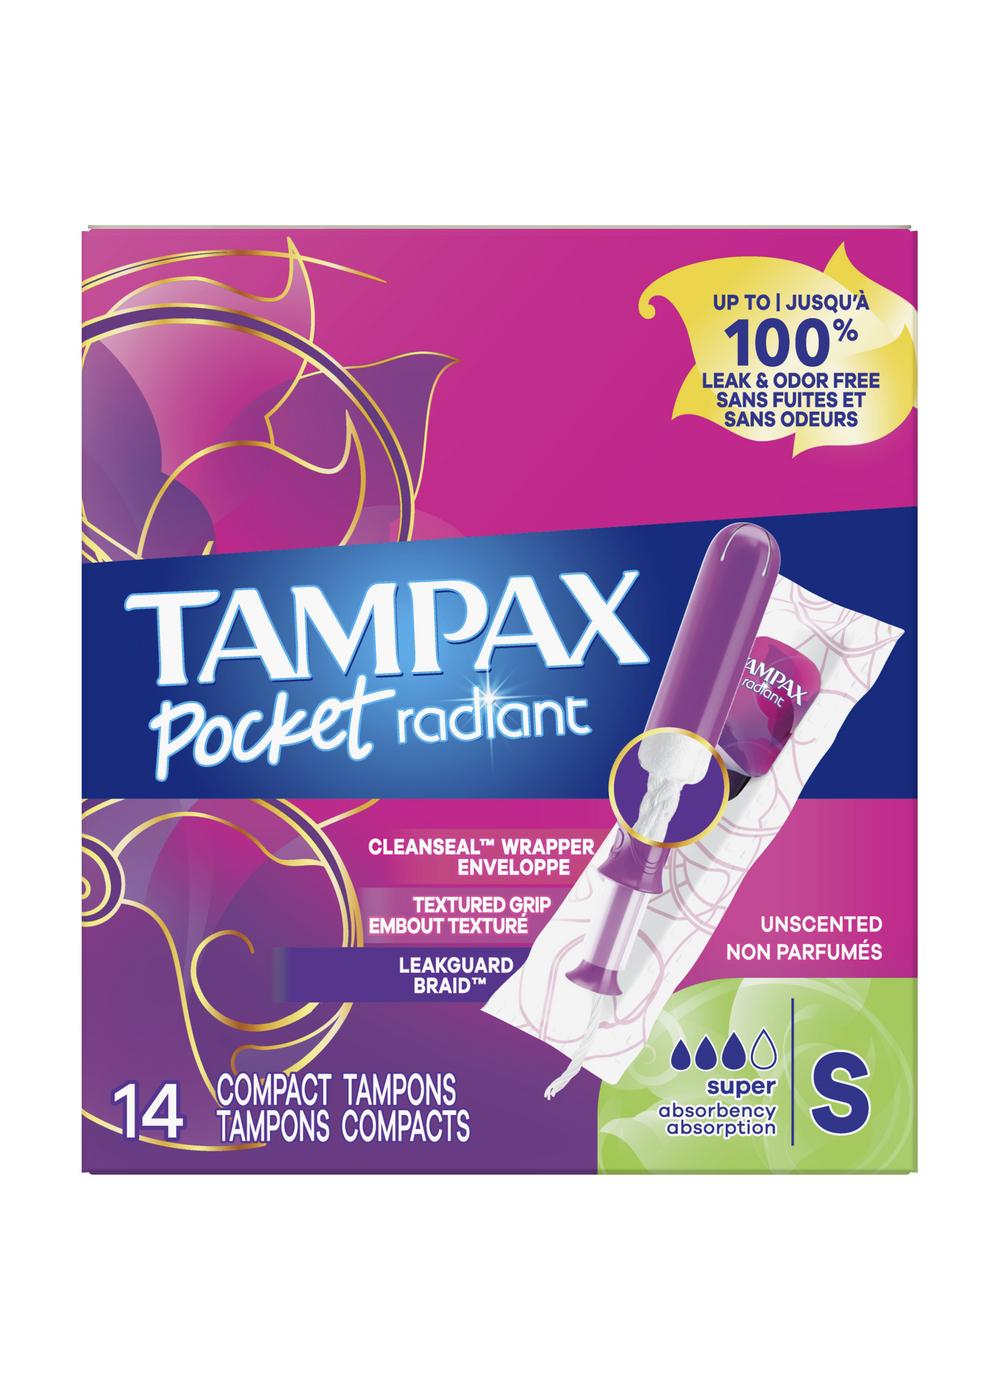 Tampax Radiant Pocket Compact Tampons - Super; image 1 of 9